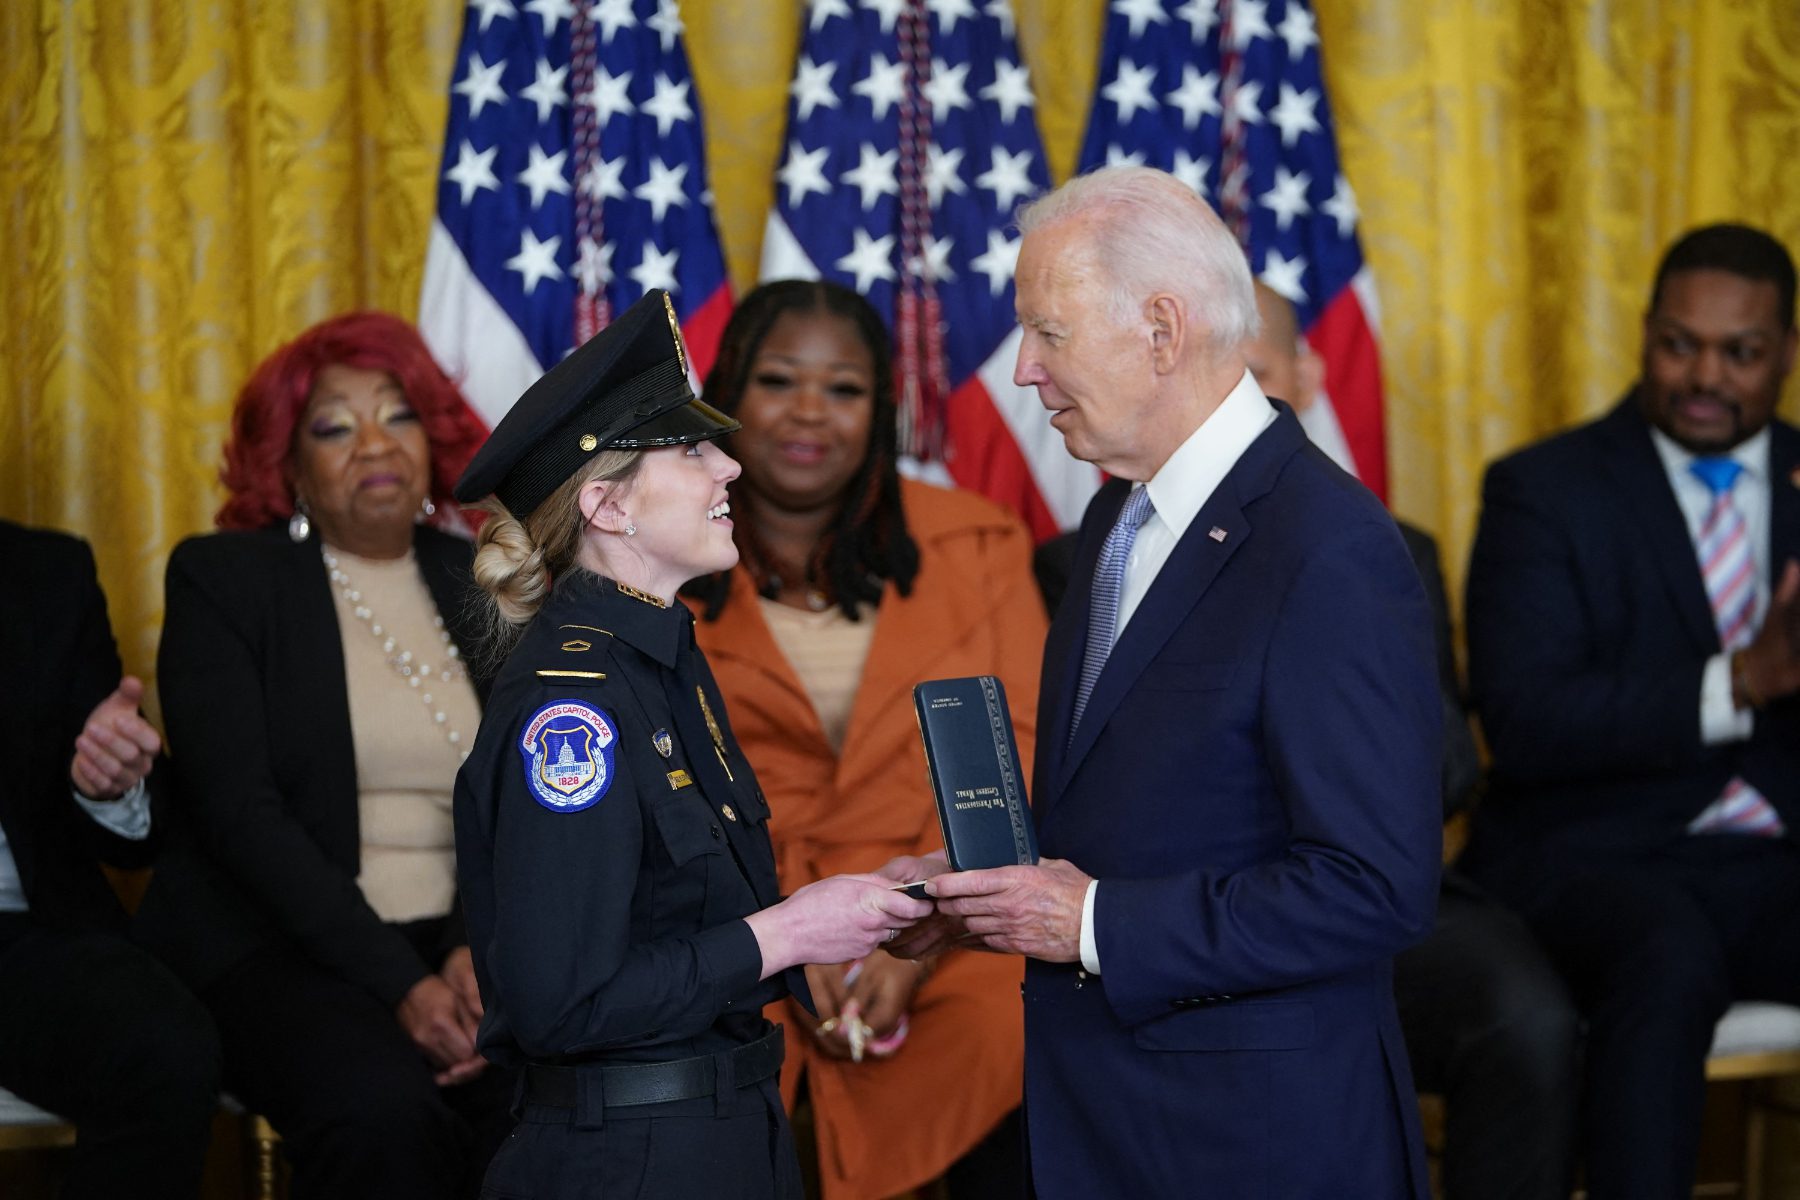 Officer Caroline Edwards of the Capitol Police receives the Presidential Citizens Medal from President Joe Biden for her defense of the Capitol on January 6